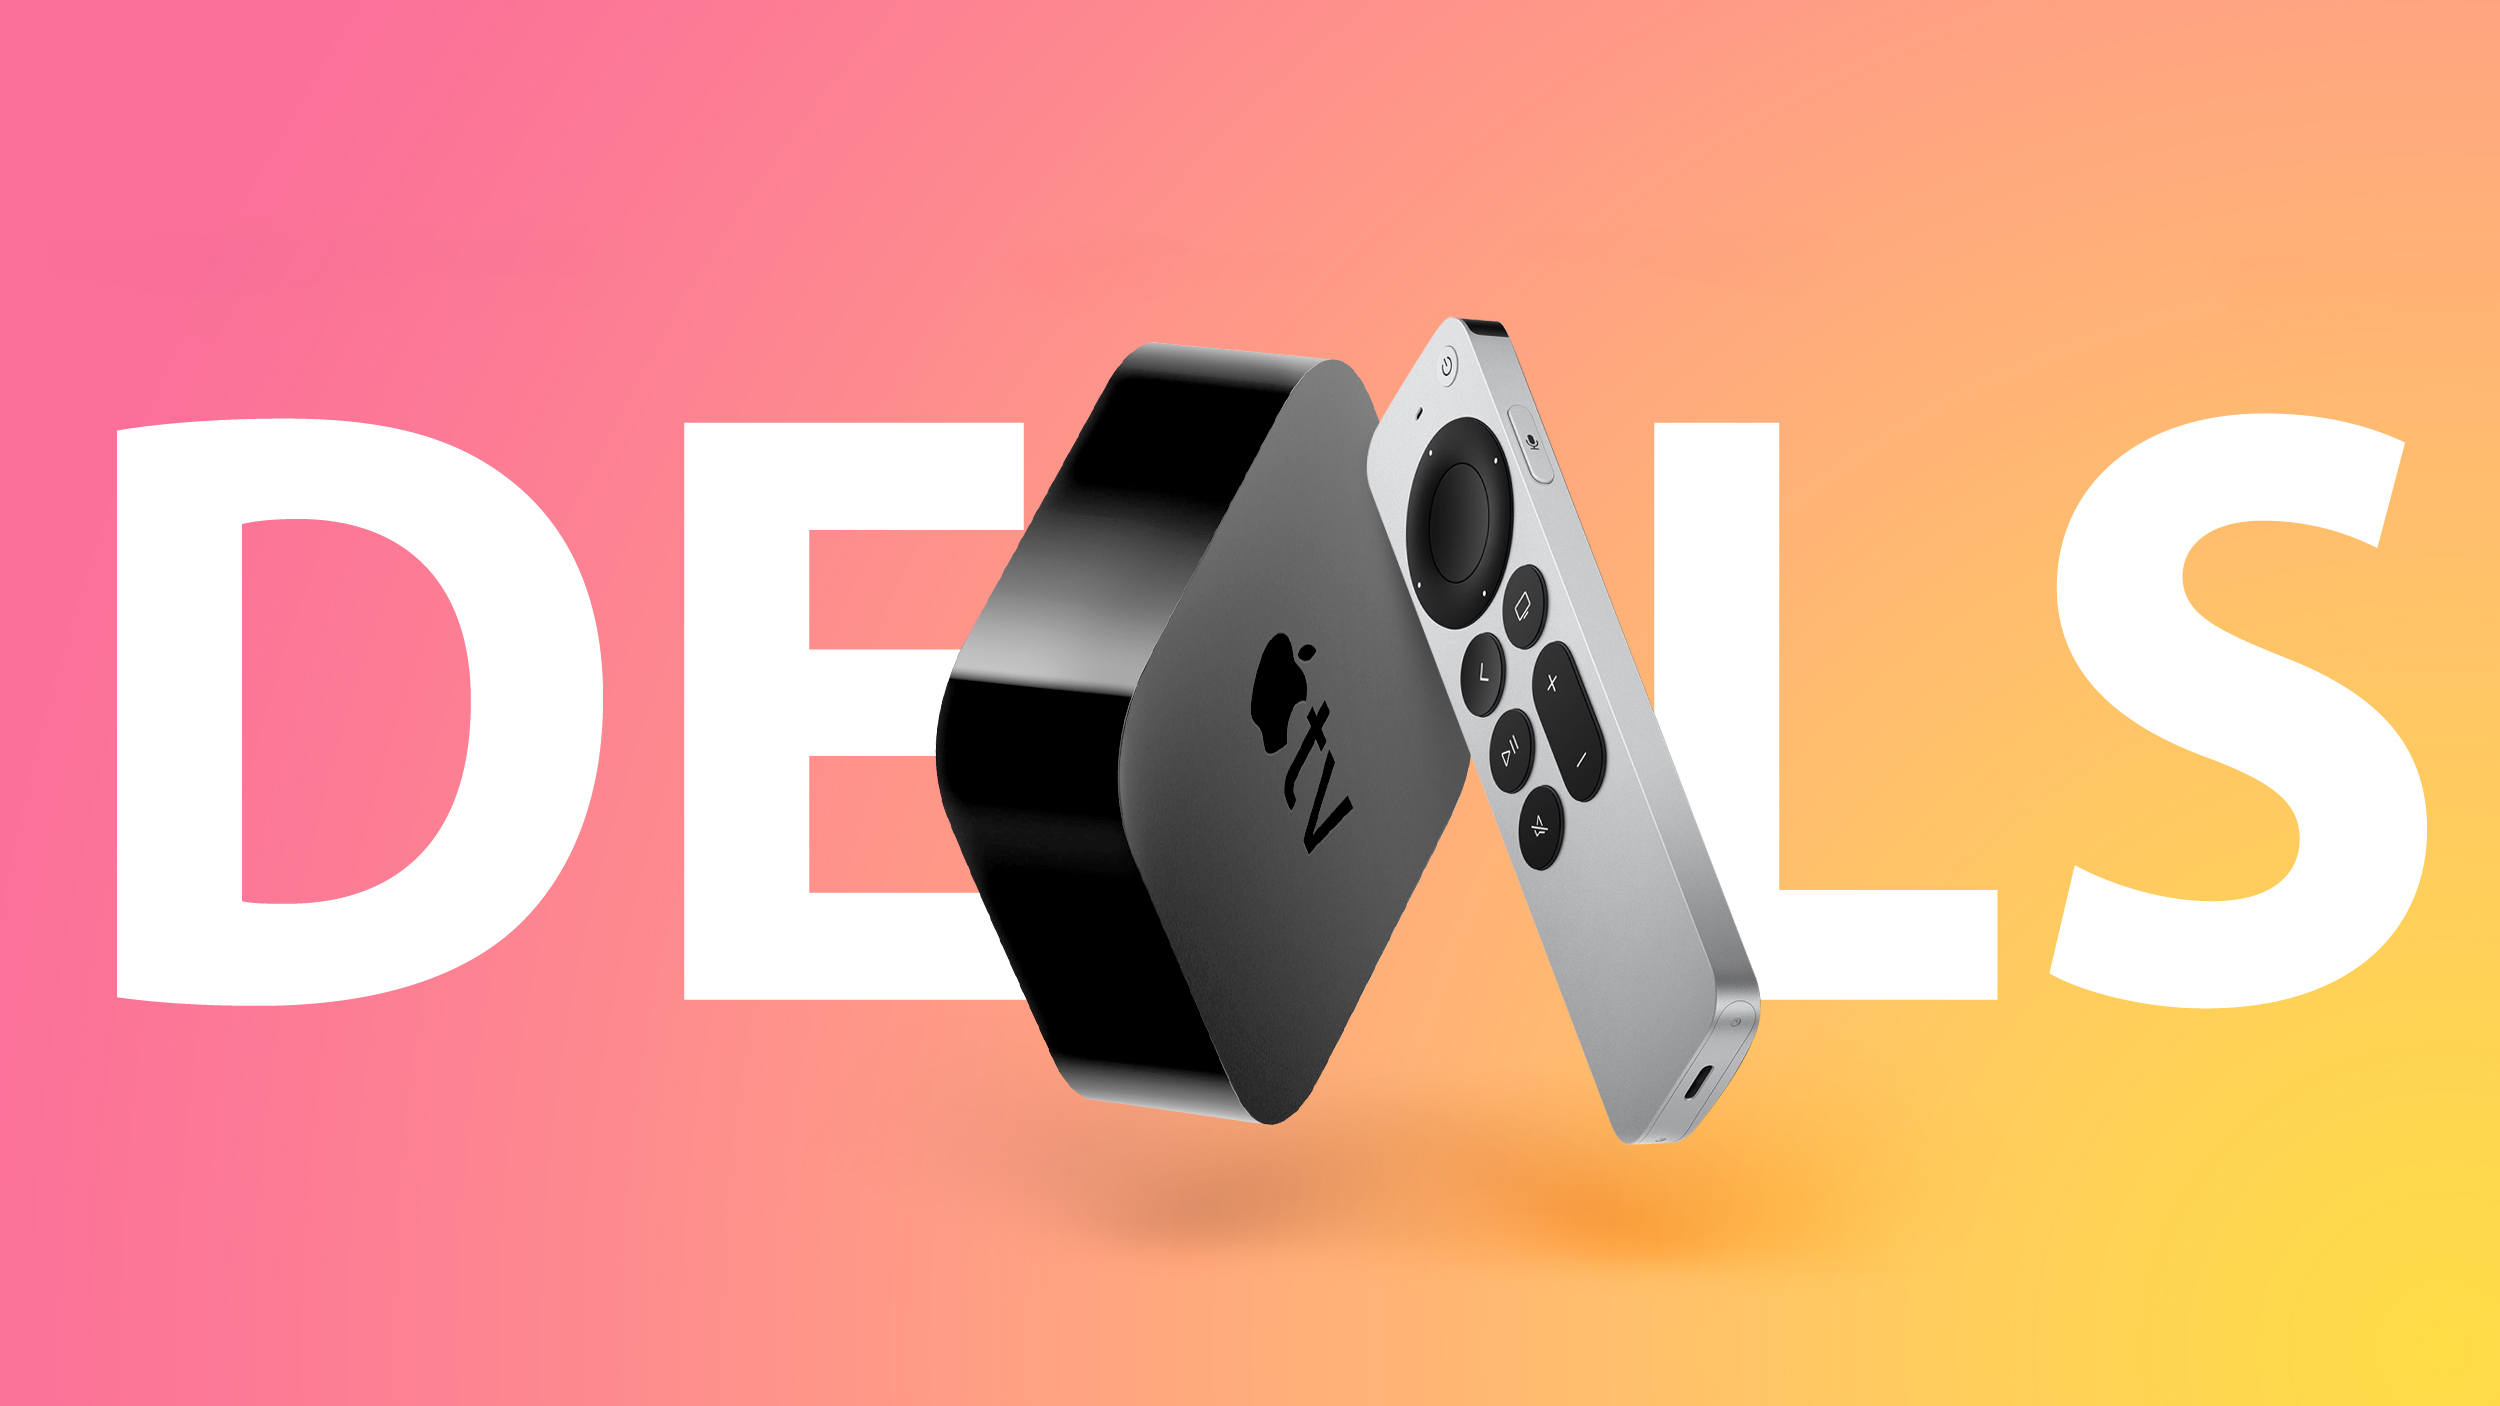 Deals: Get the 2021 64GB Apple TV 4K for the All-Time Low Price of $99.97 on Amazon